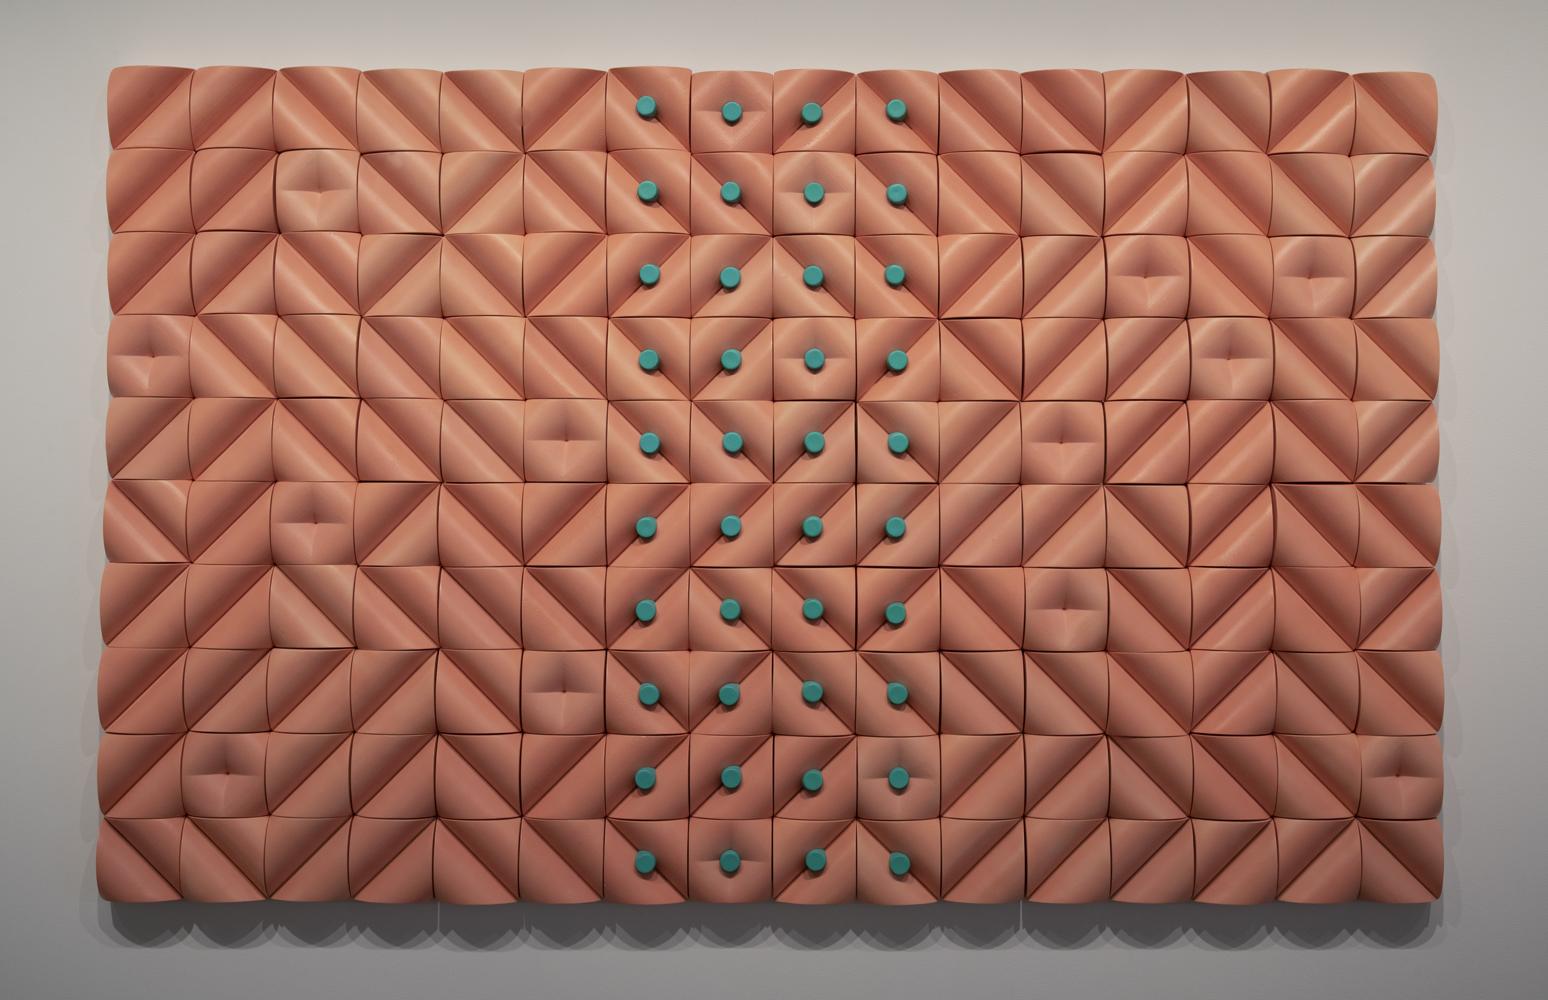 a large, pink, rectangular tile piece of a geometric design featuring green dots in the middle